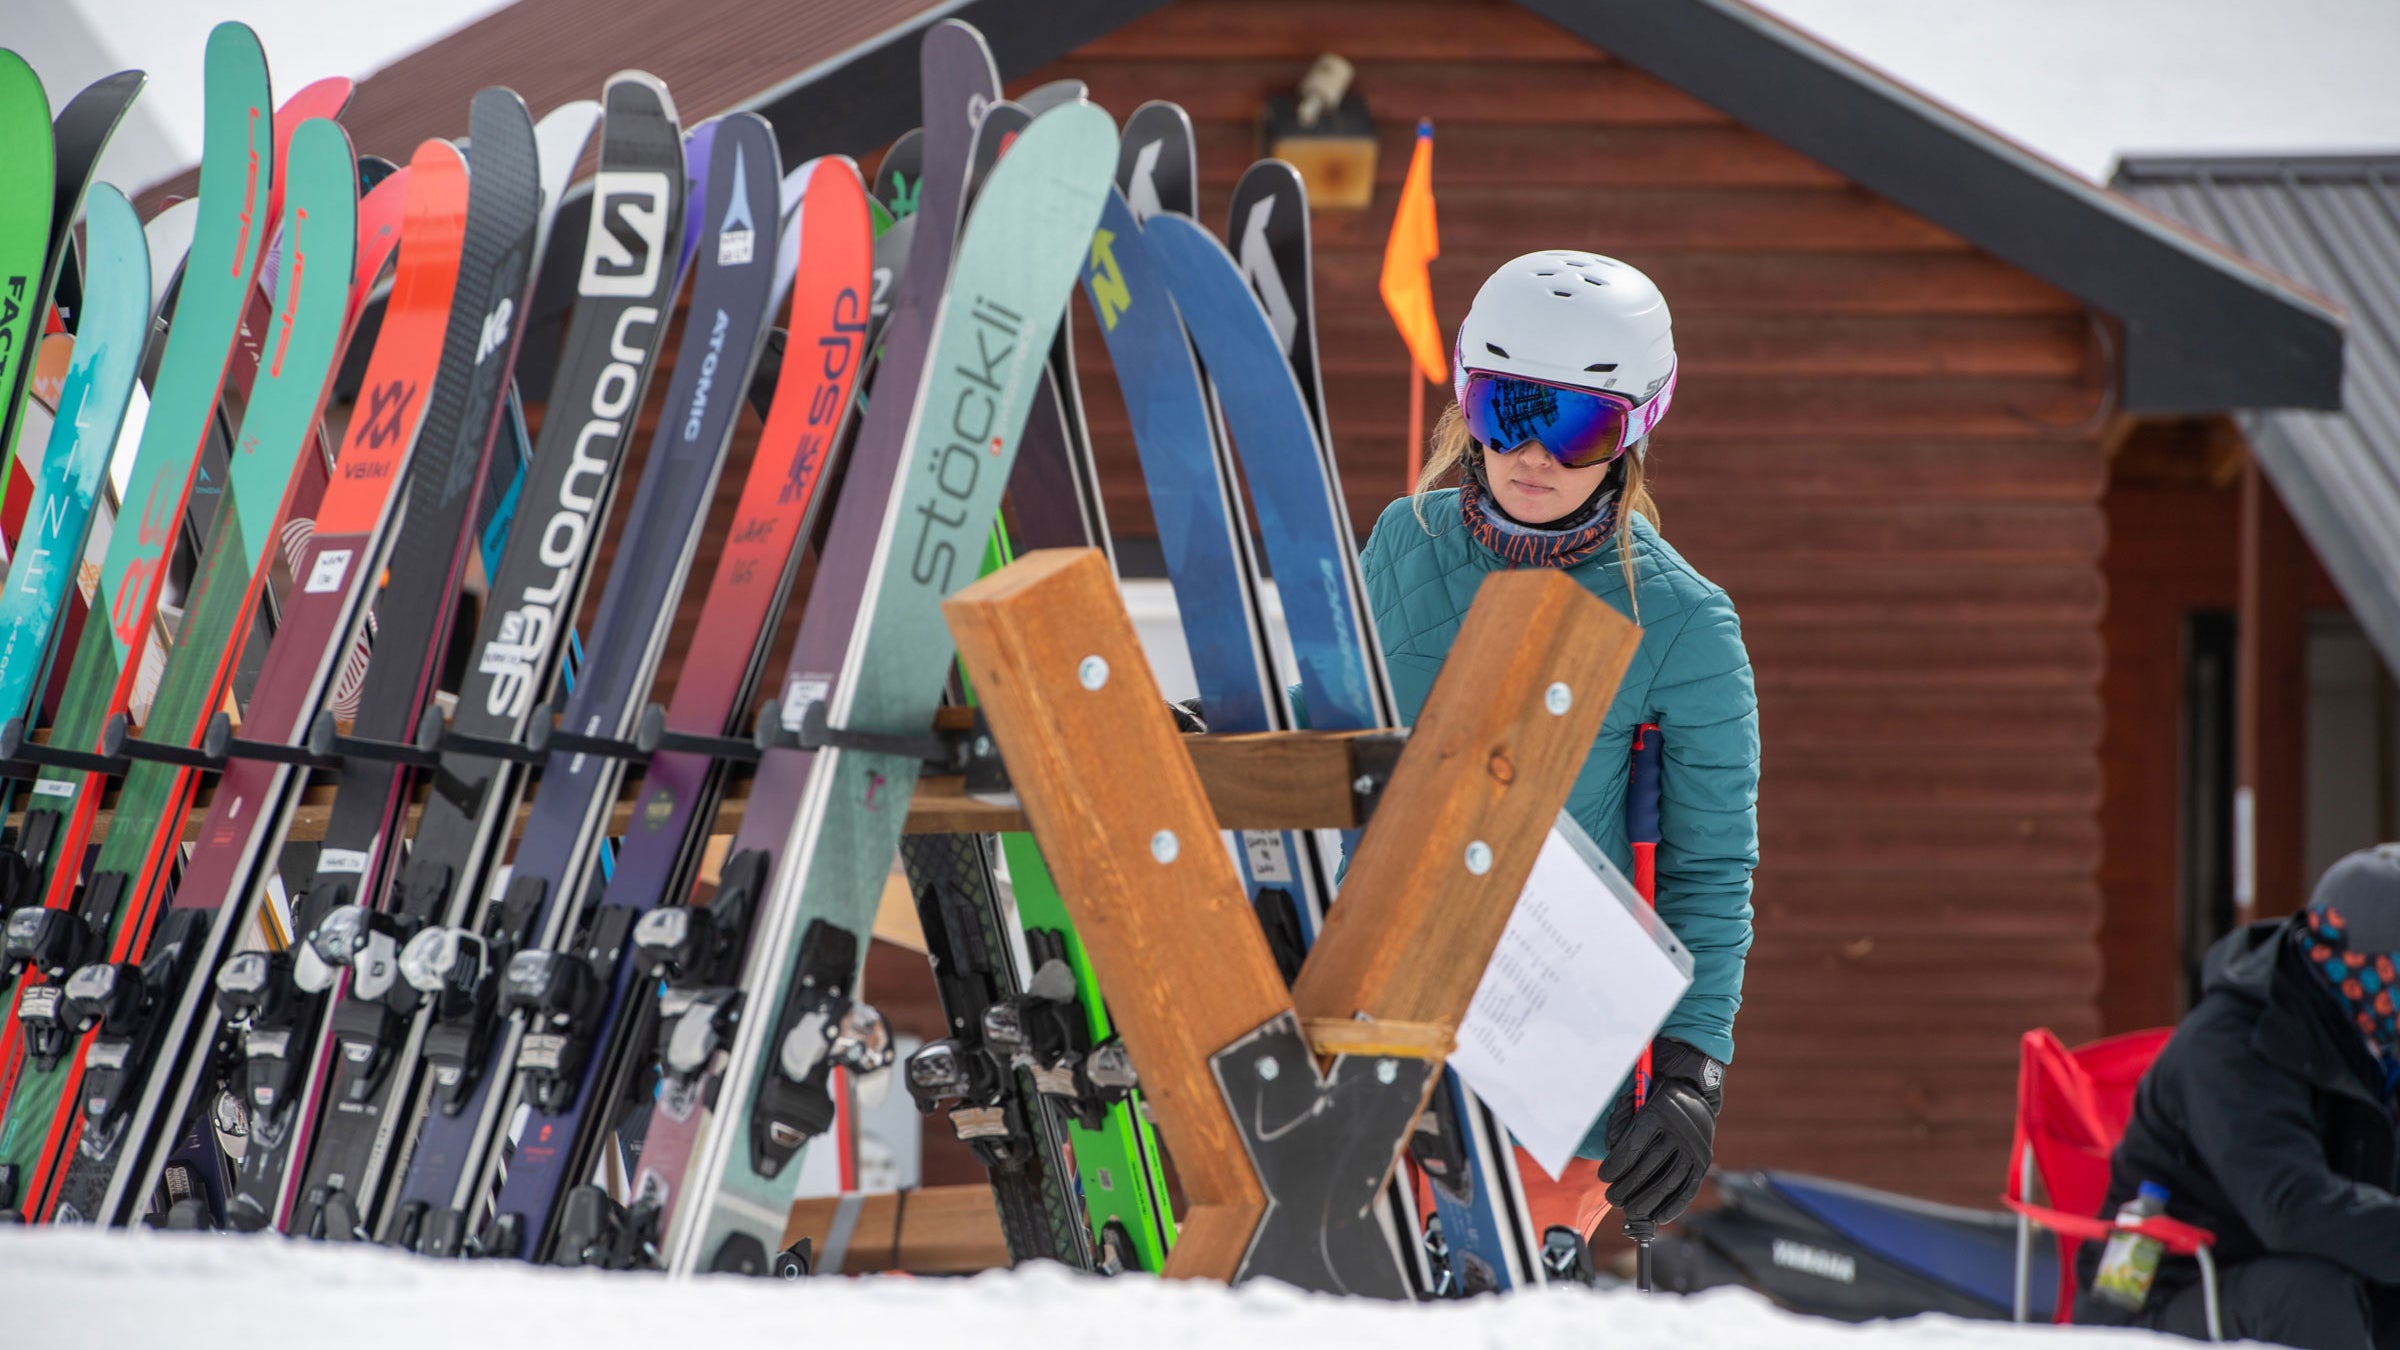 The 9 Best Skis of All Time According to Our Testers - Men's Journal